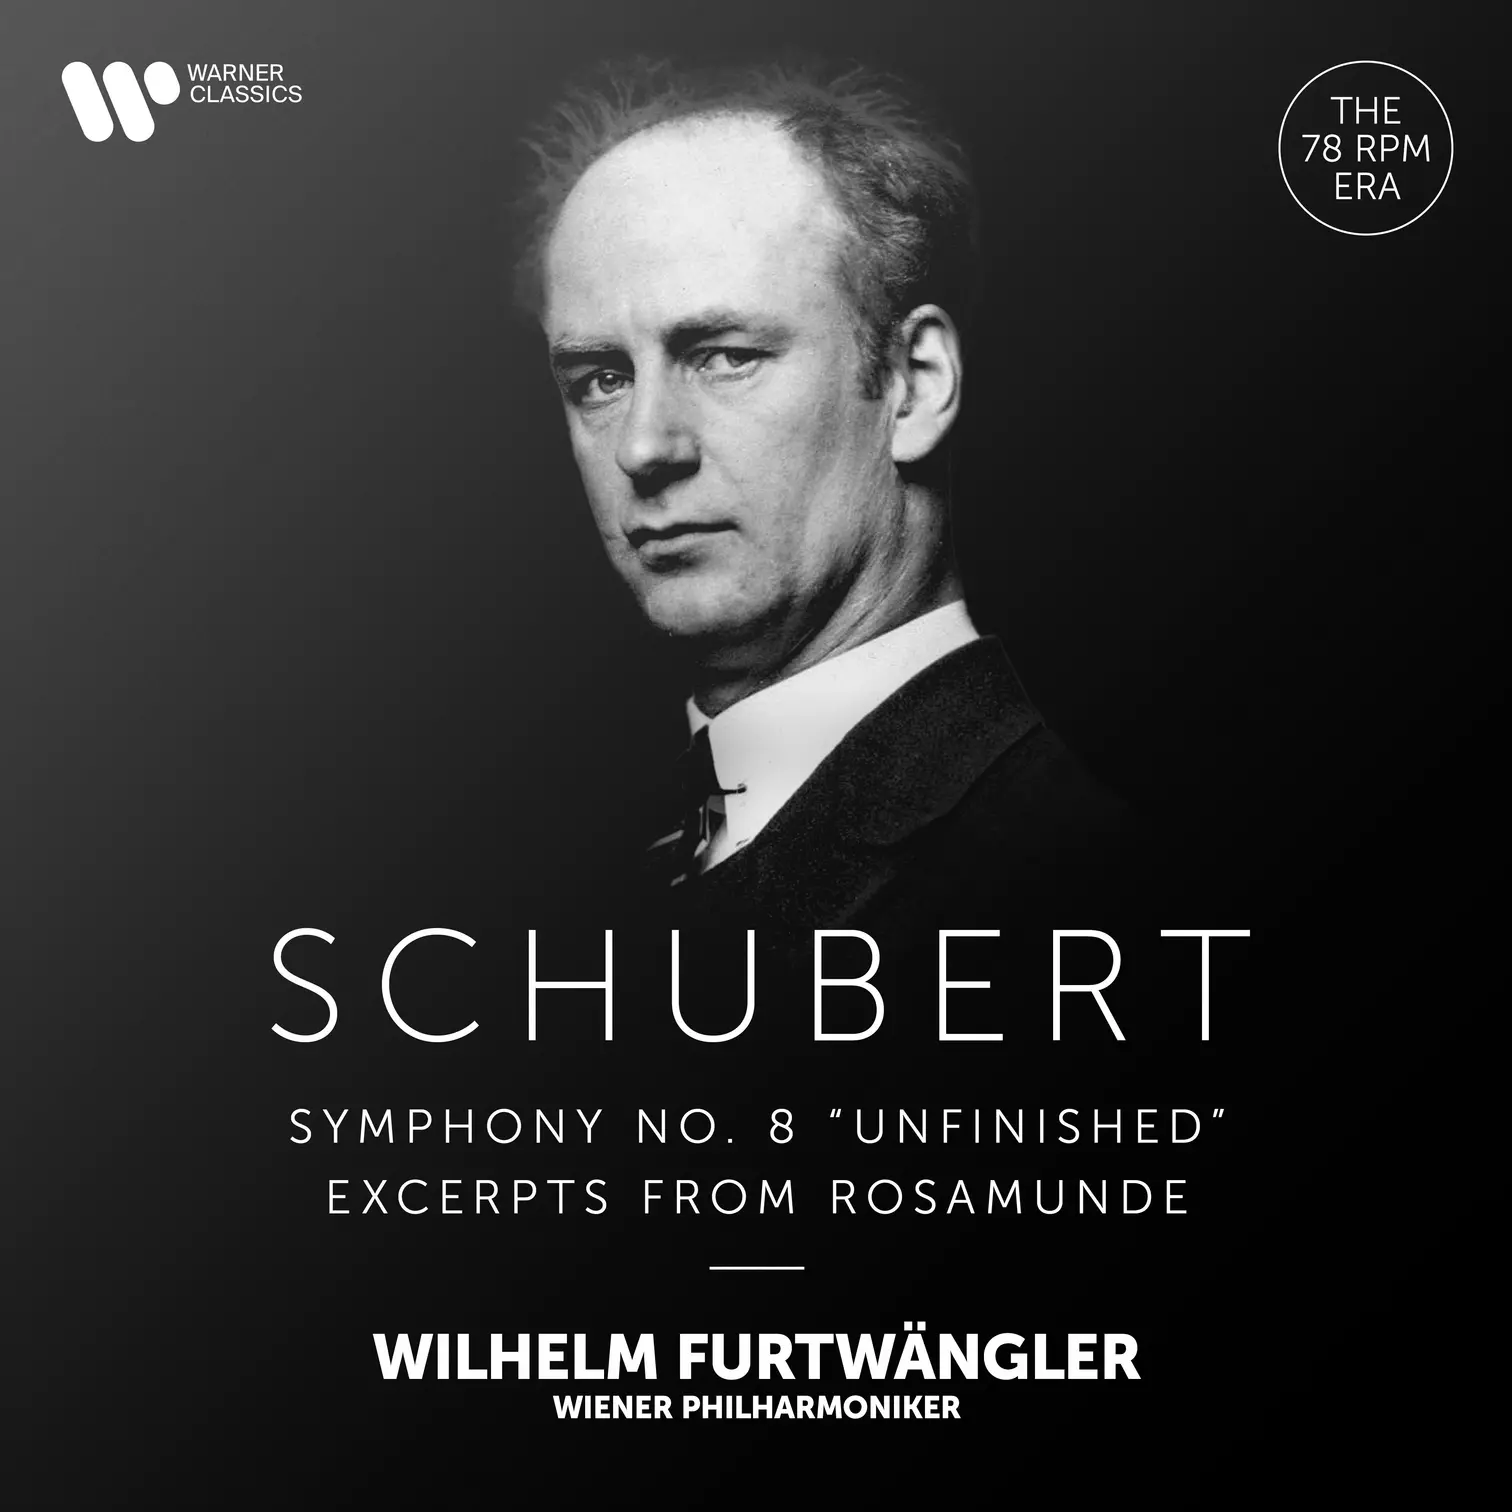 Schubert: Symphony No. 8 “Unfinished” & Excerpts from Rosamunde